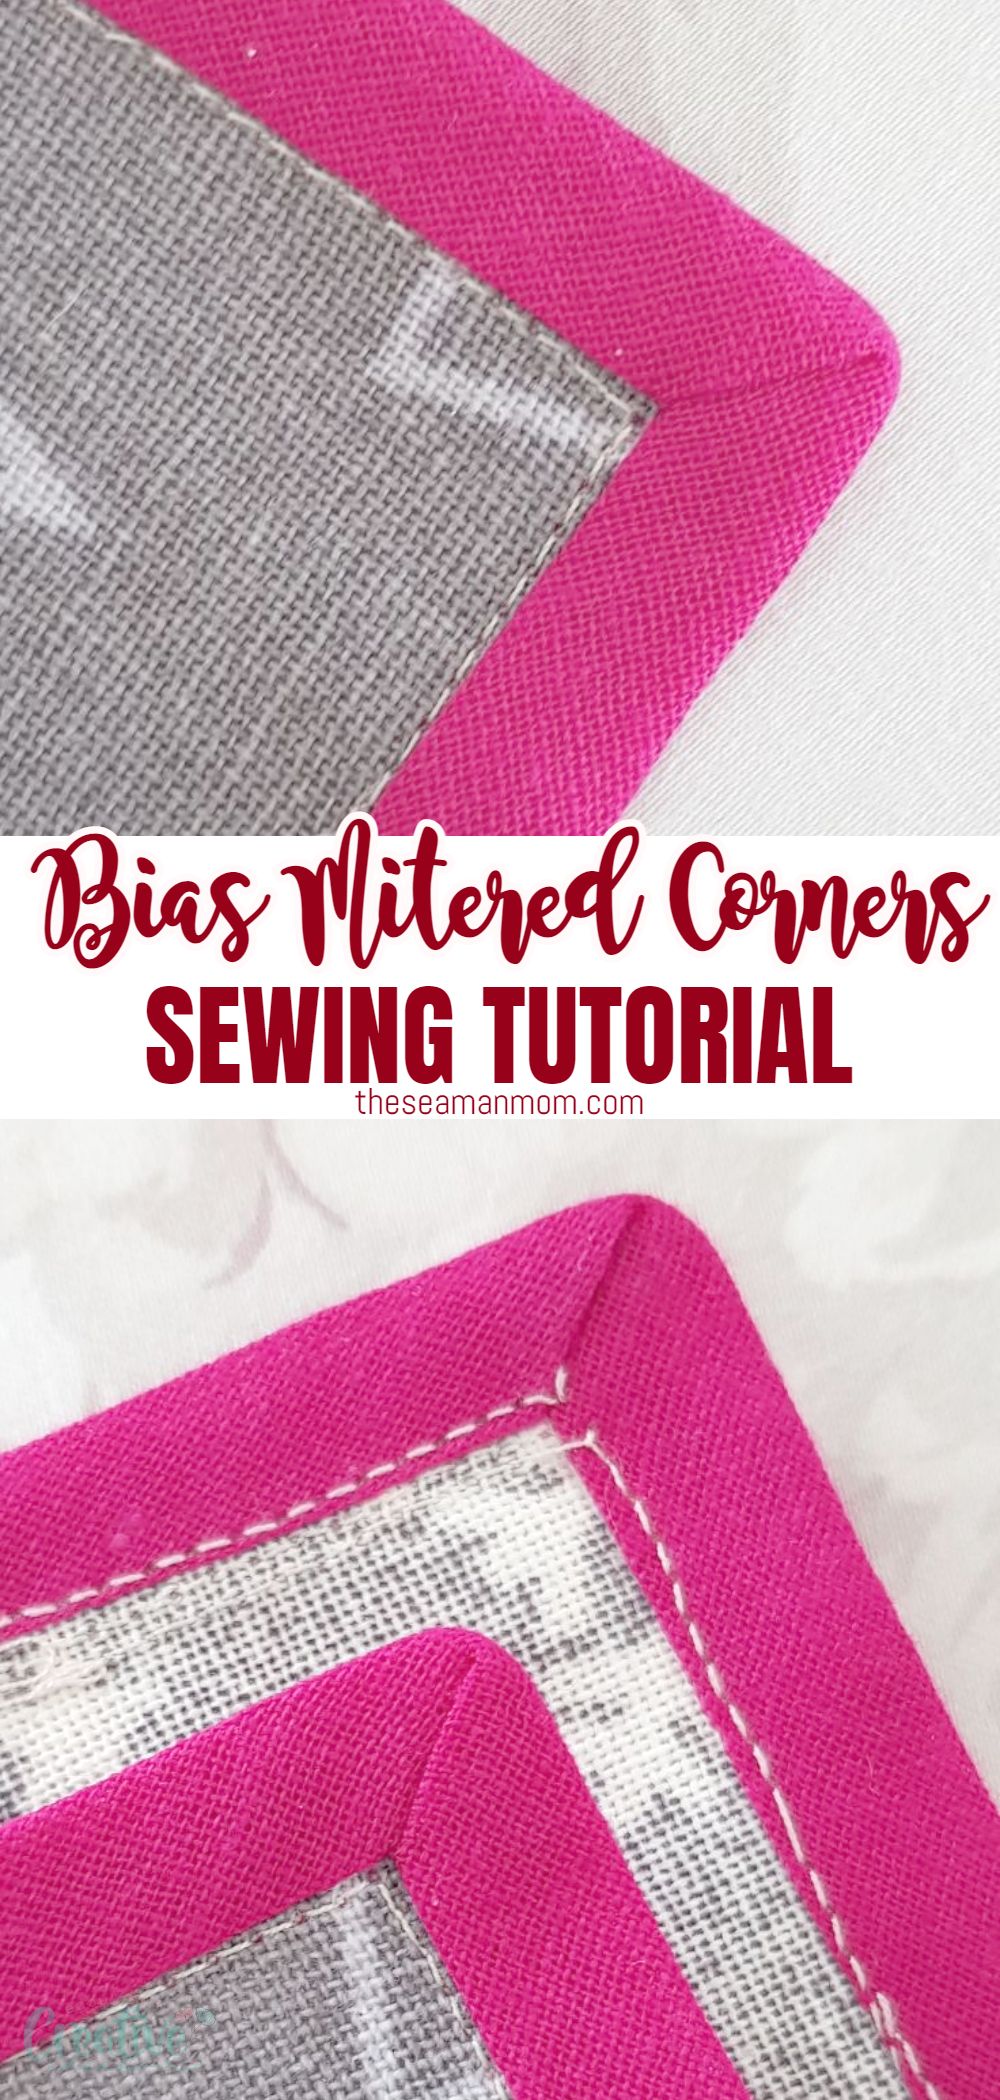 This comprehensive step-by-step tutorial offers a simple and easy way to learn the invaluable skill of sewing mitered corners with bias tape. Mastering this technique will change the appearance of your sewing projects, such as napkins, place mats, table runners, and tablecloths, giving them a polished and professional look. Follow along and discover how to achieve beautifully finished mitered corners with bias tape! via @petroneagu